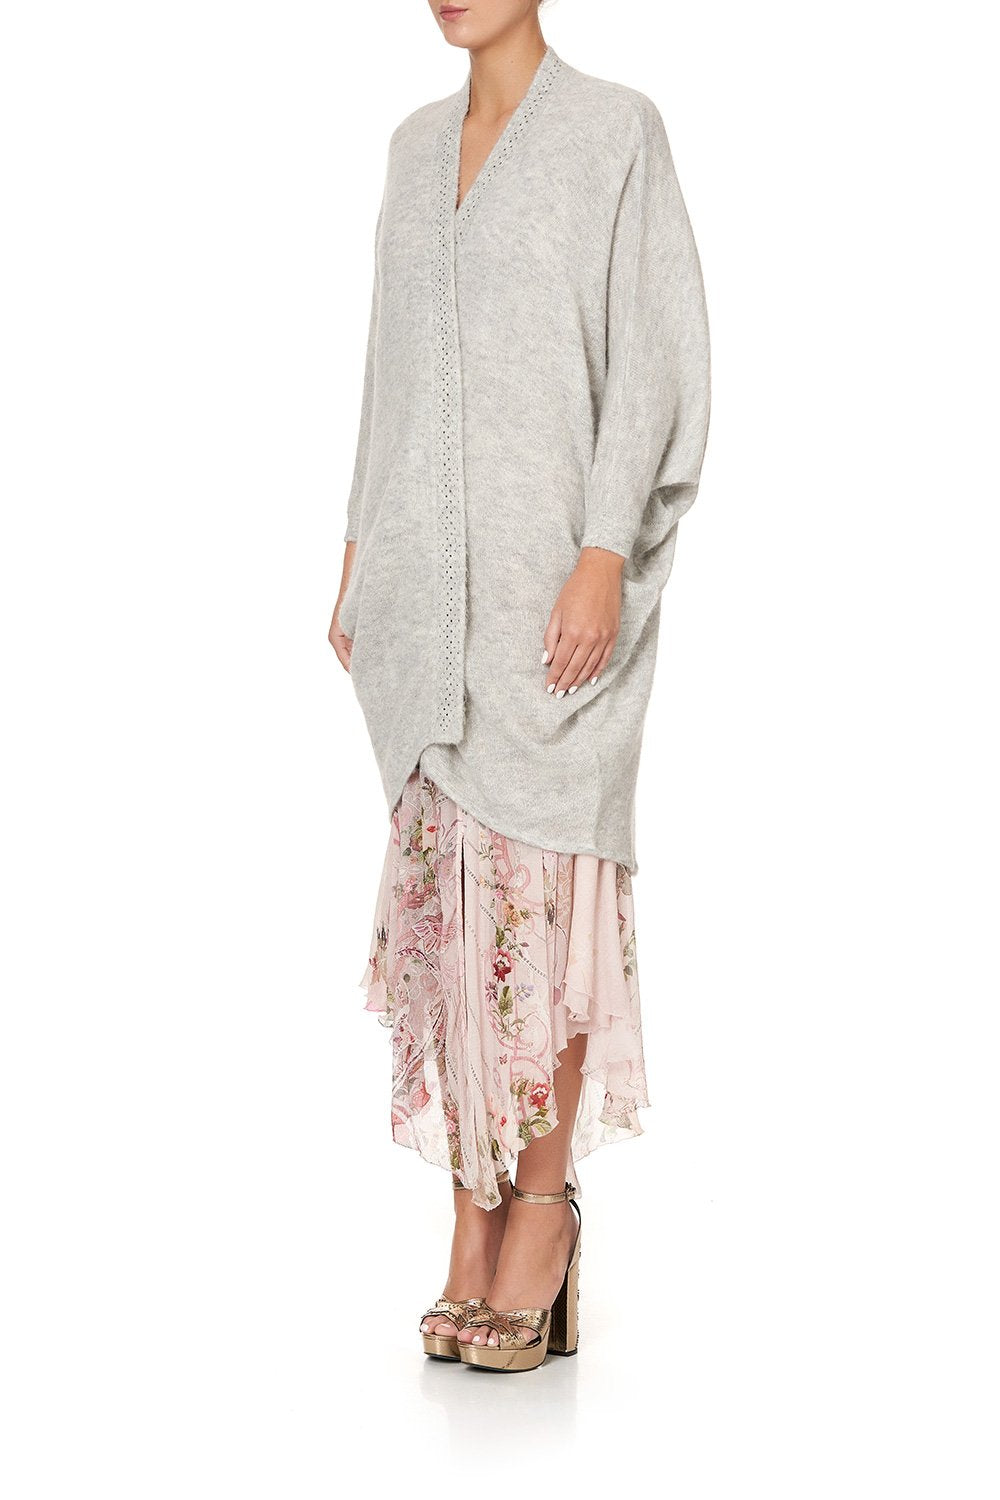 SOFT KNIT PONCHO WITH EMBROIDERY GREY ISTENANYA